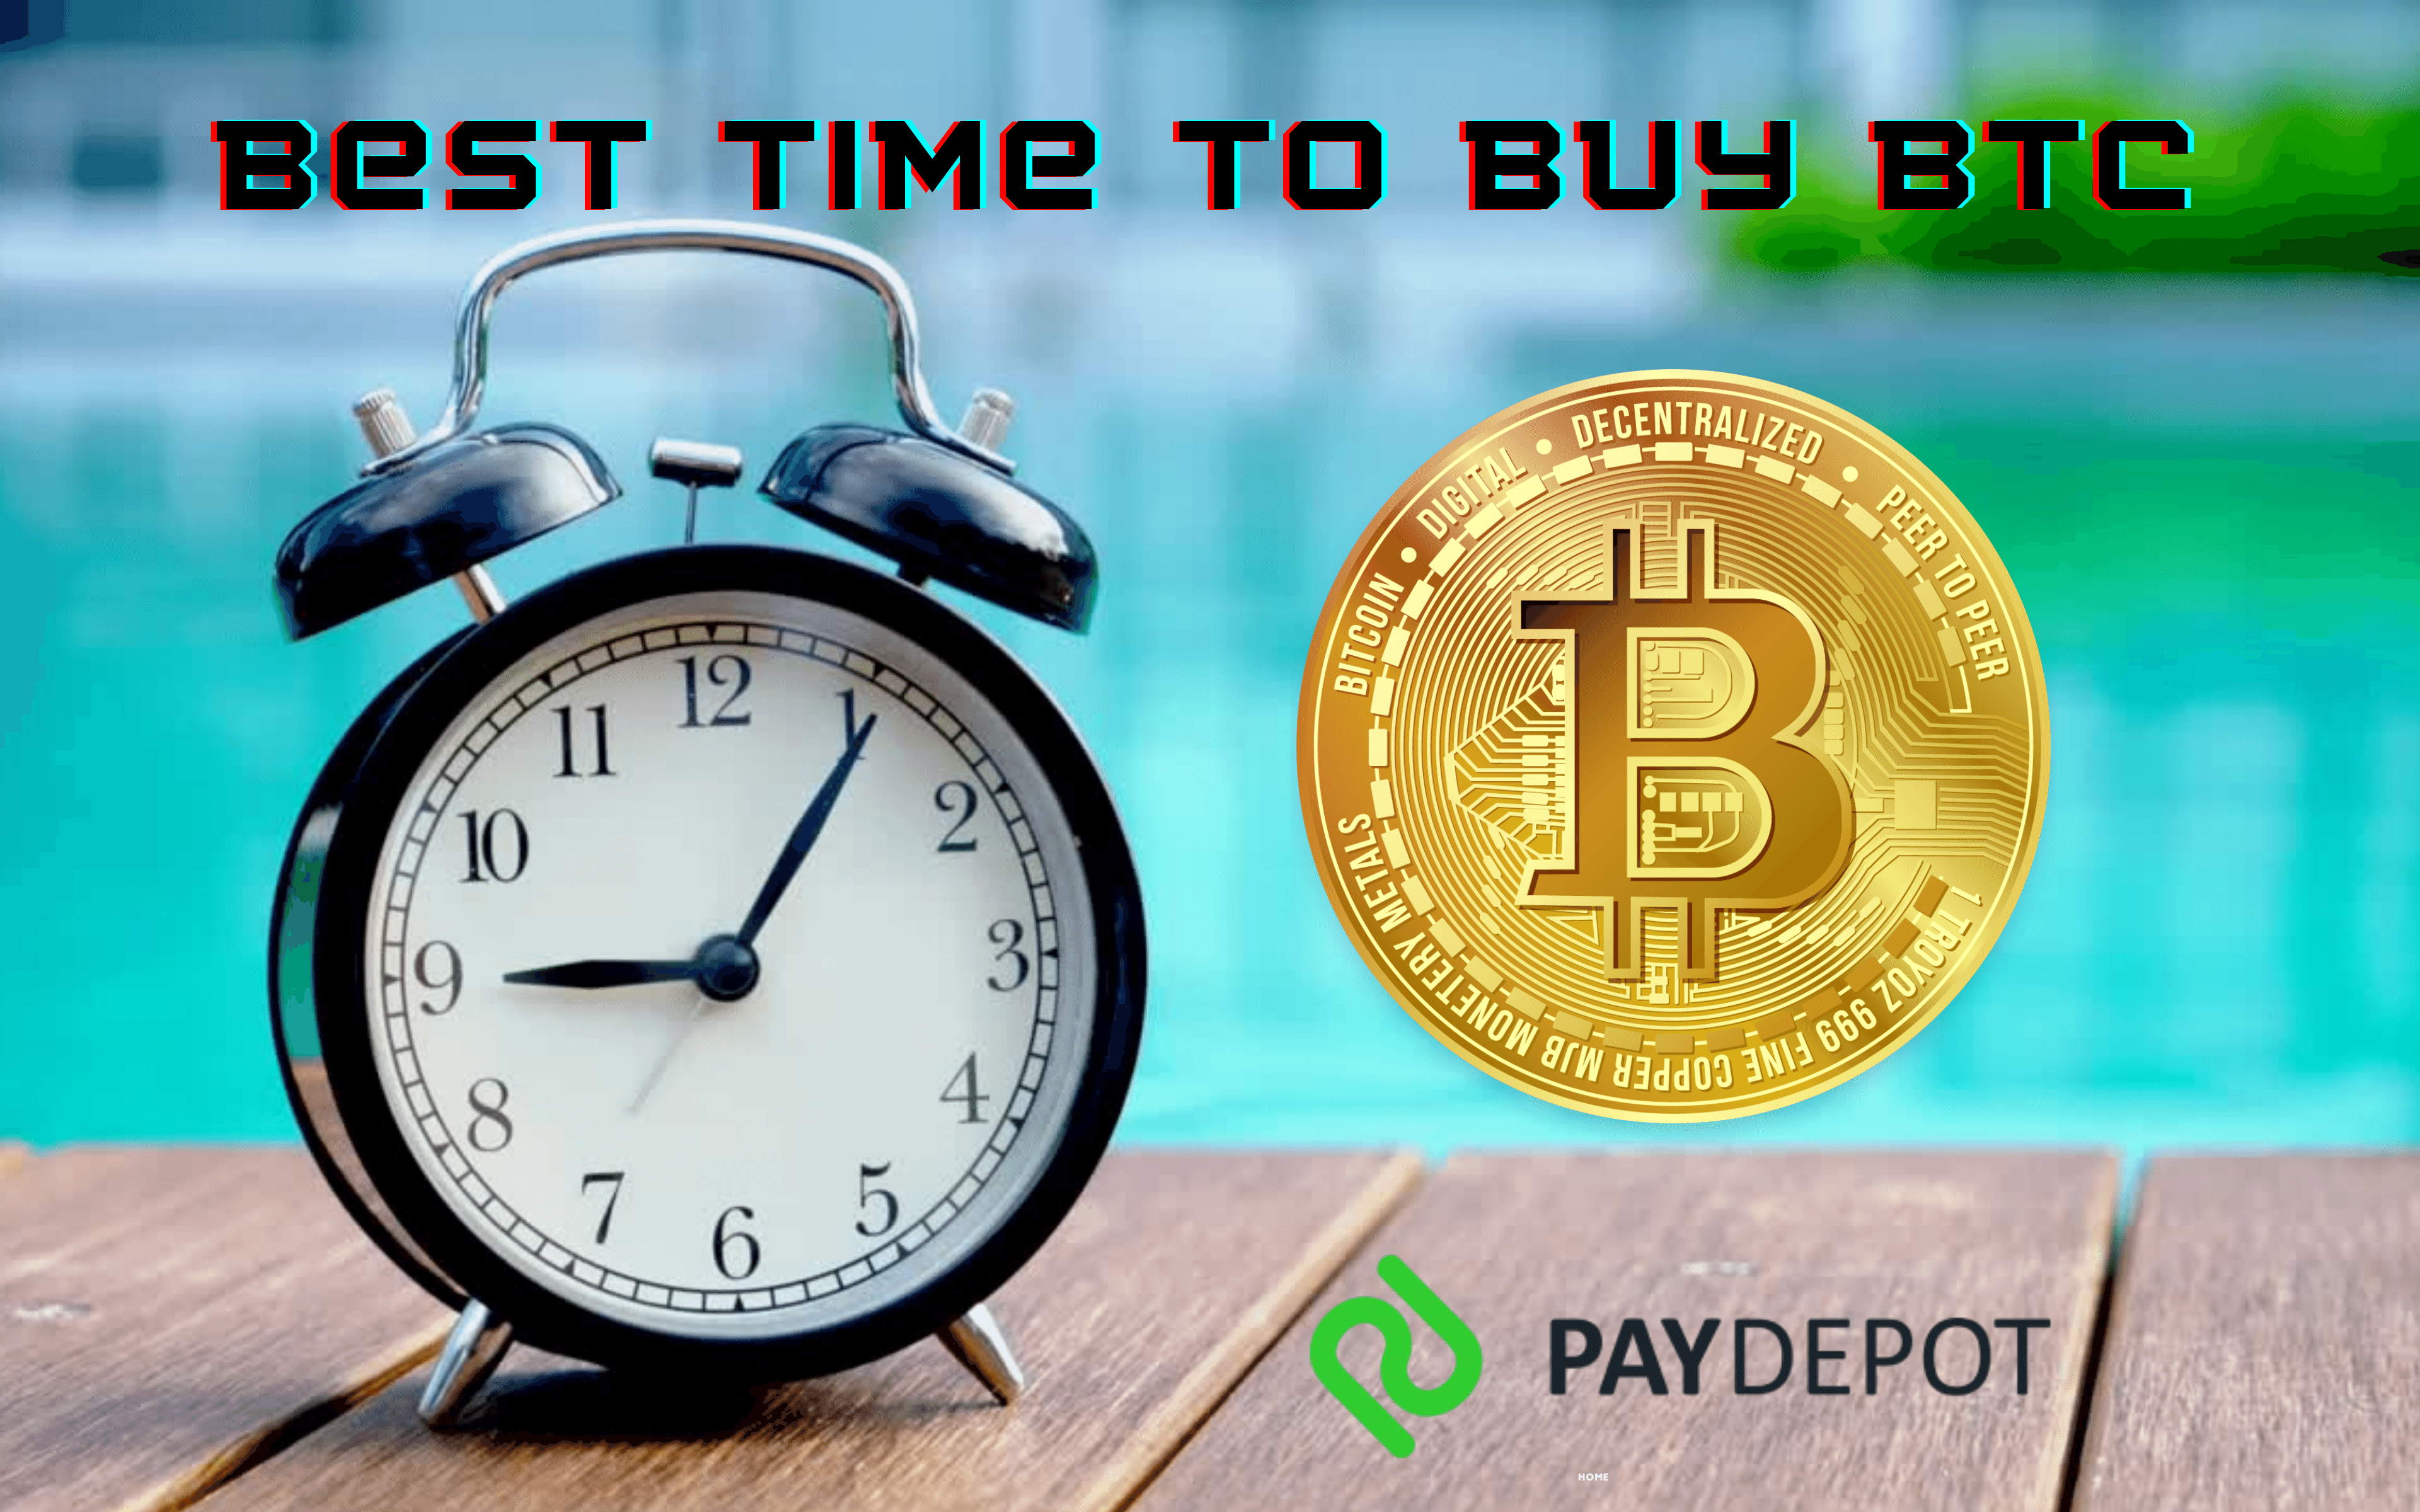 What Time of Day is Best to Buy Crypto? The Ultimate Guide